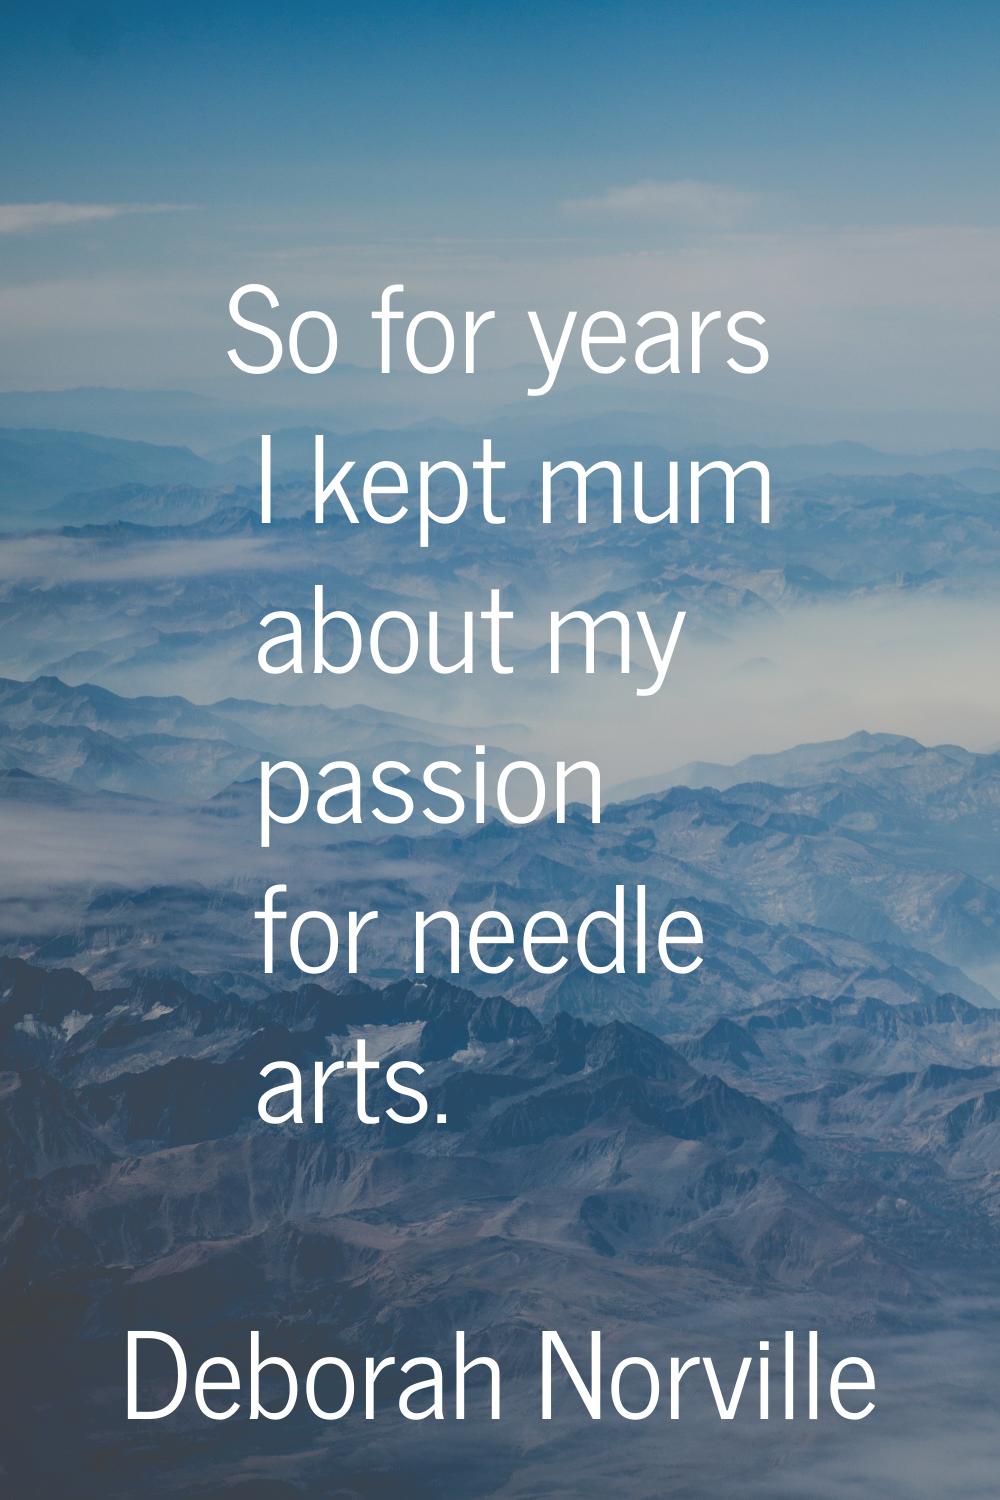 So for years I kept mum about my passion for needle arts.